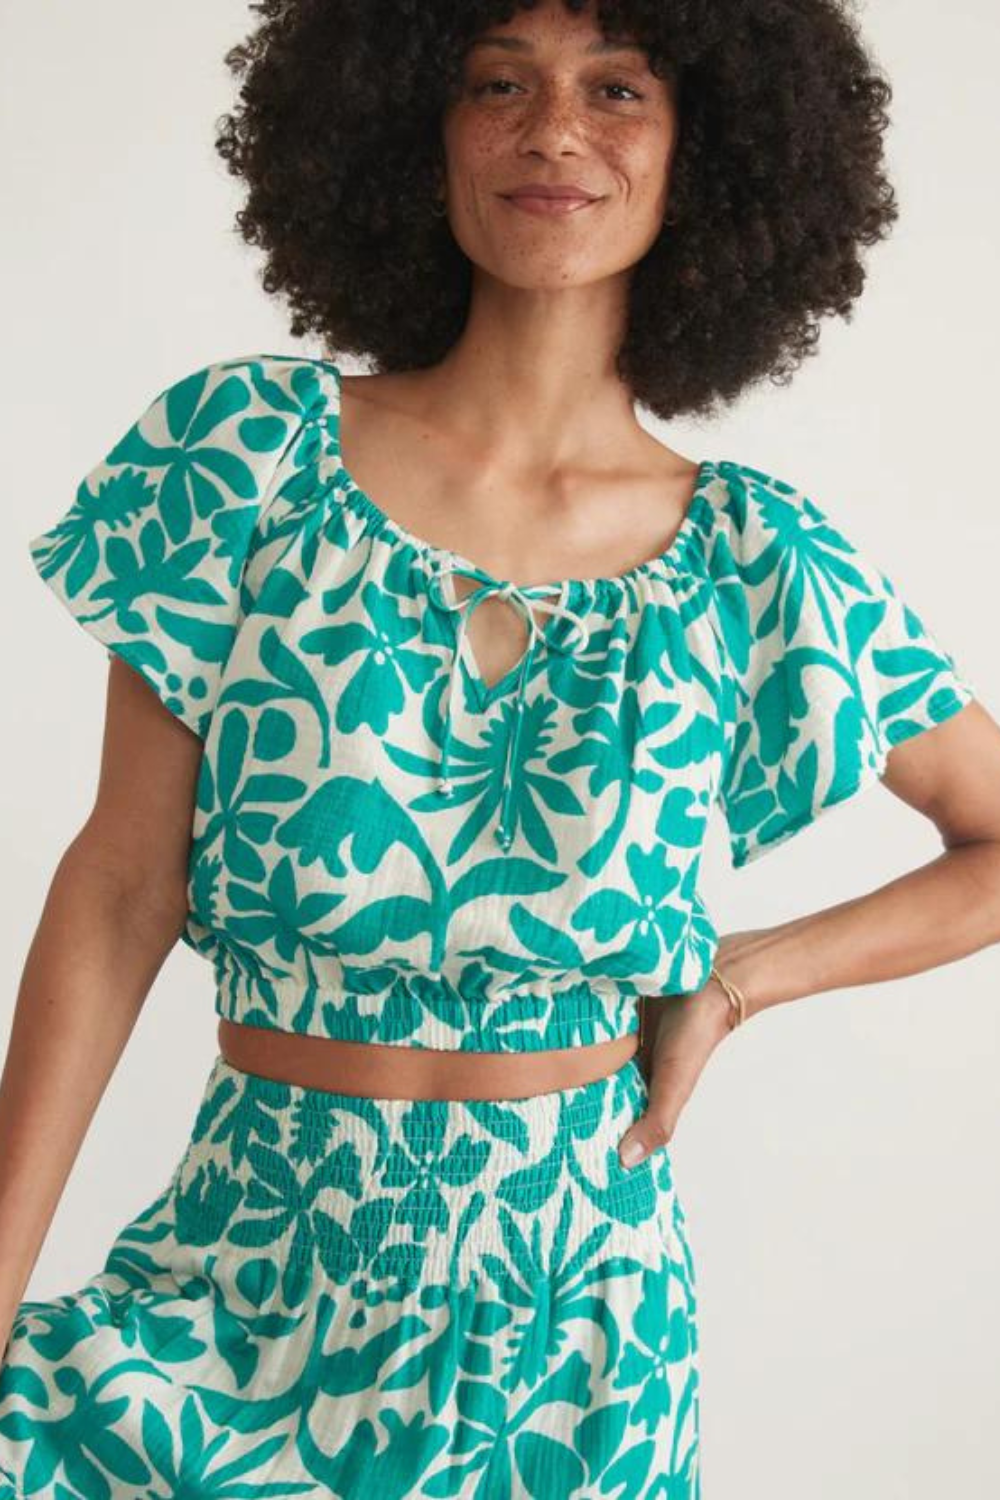 Marine Layer Tiana Cropped Blouse - Spruce Flora